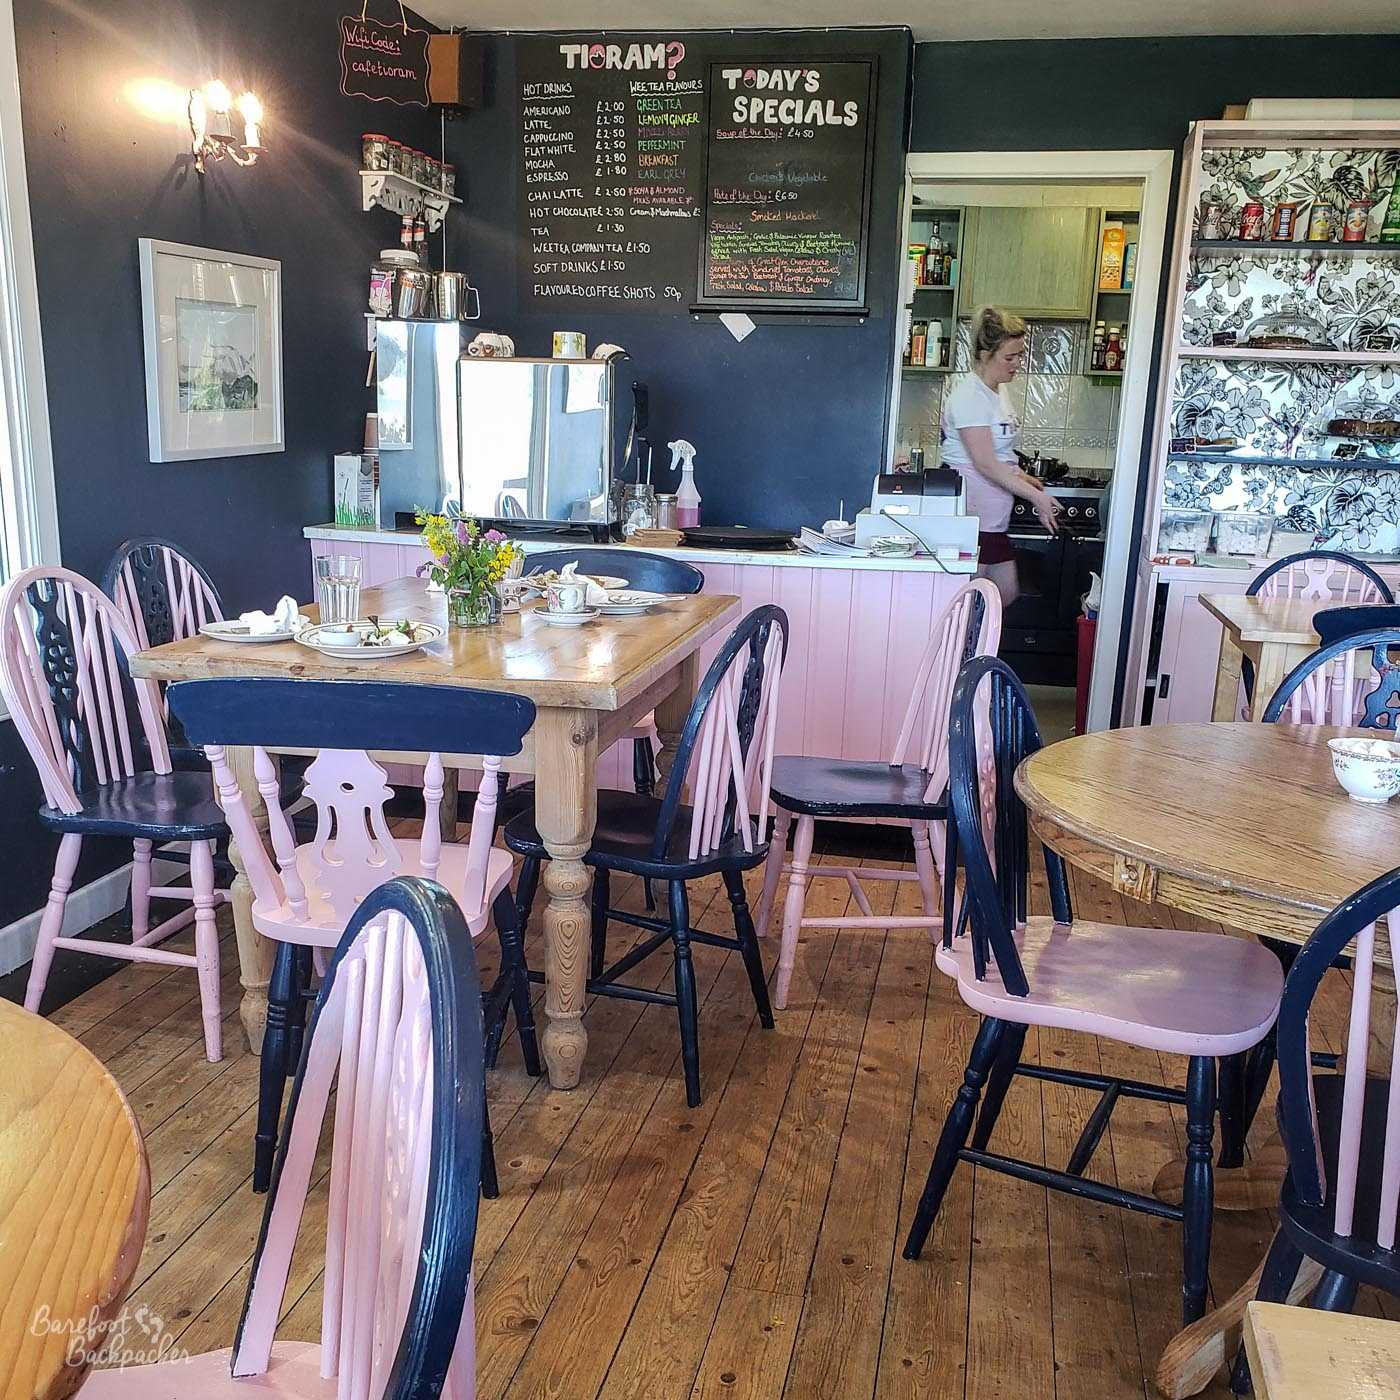 Inside the Tioram Cafe in Acharacle. Black chairs with pink seats, a wooden floors, pink wooden serving counter, wooden tables (light brown). A chalkboard behind the counter with the menu on it. Door to the kitchen open, a woman can be seen making stuff in it. To the right of the door is a cupboard with shelving, the back of the board is what looks like drawn flowers on wallpaper. The walls are plain darkish blue.